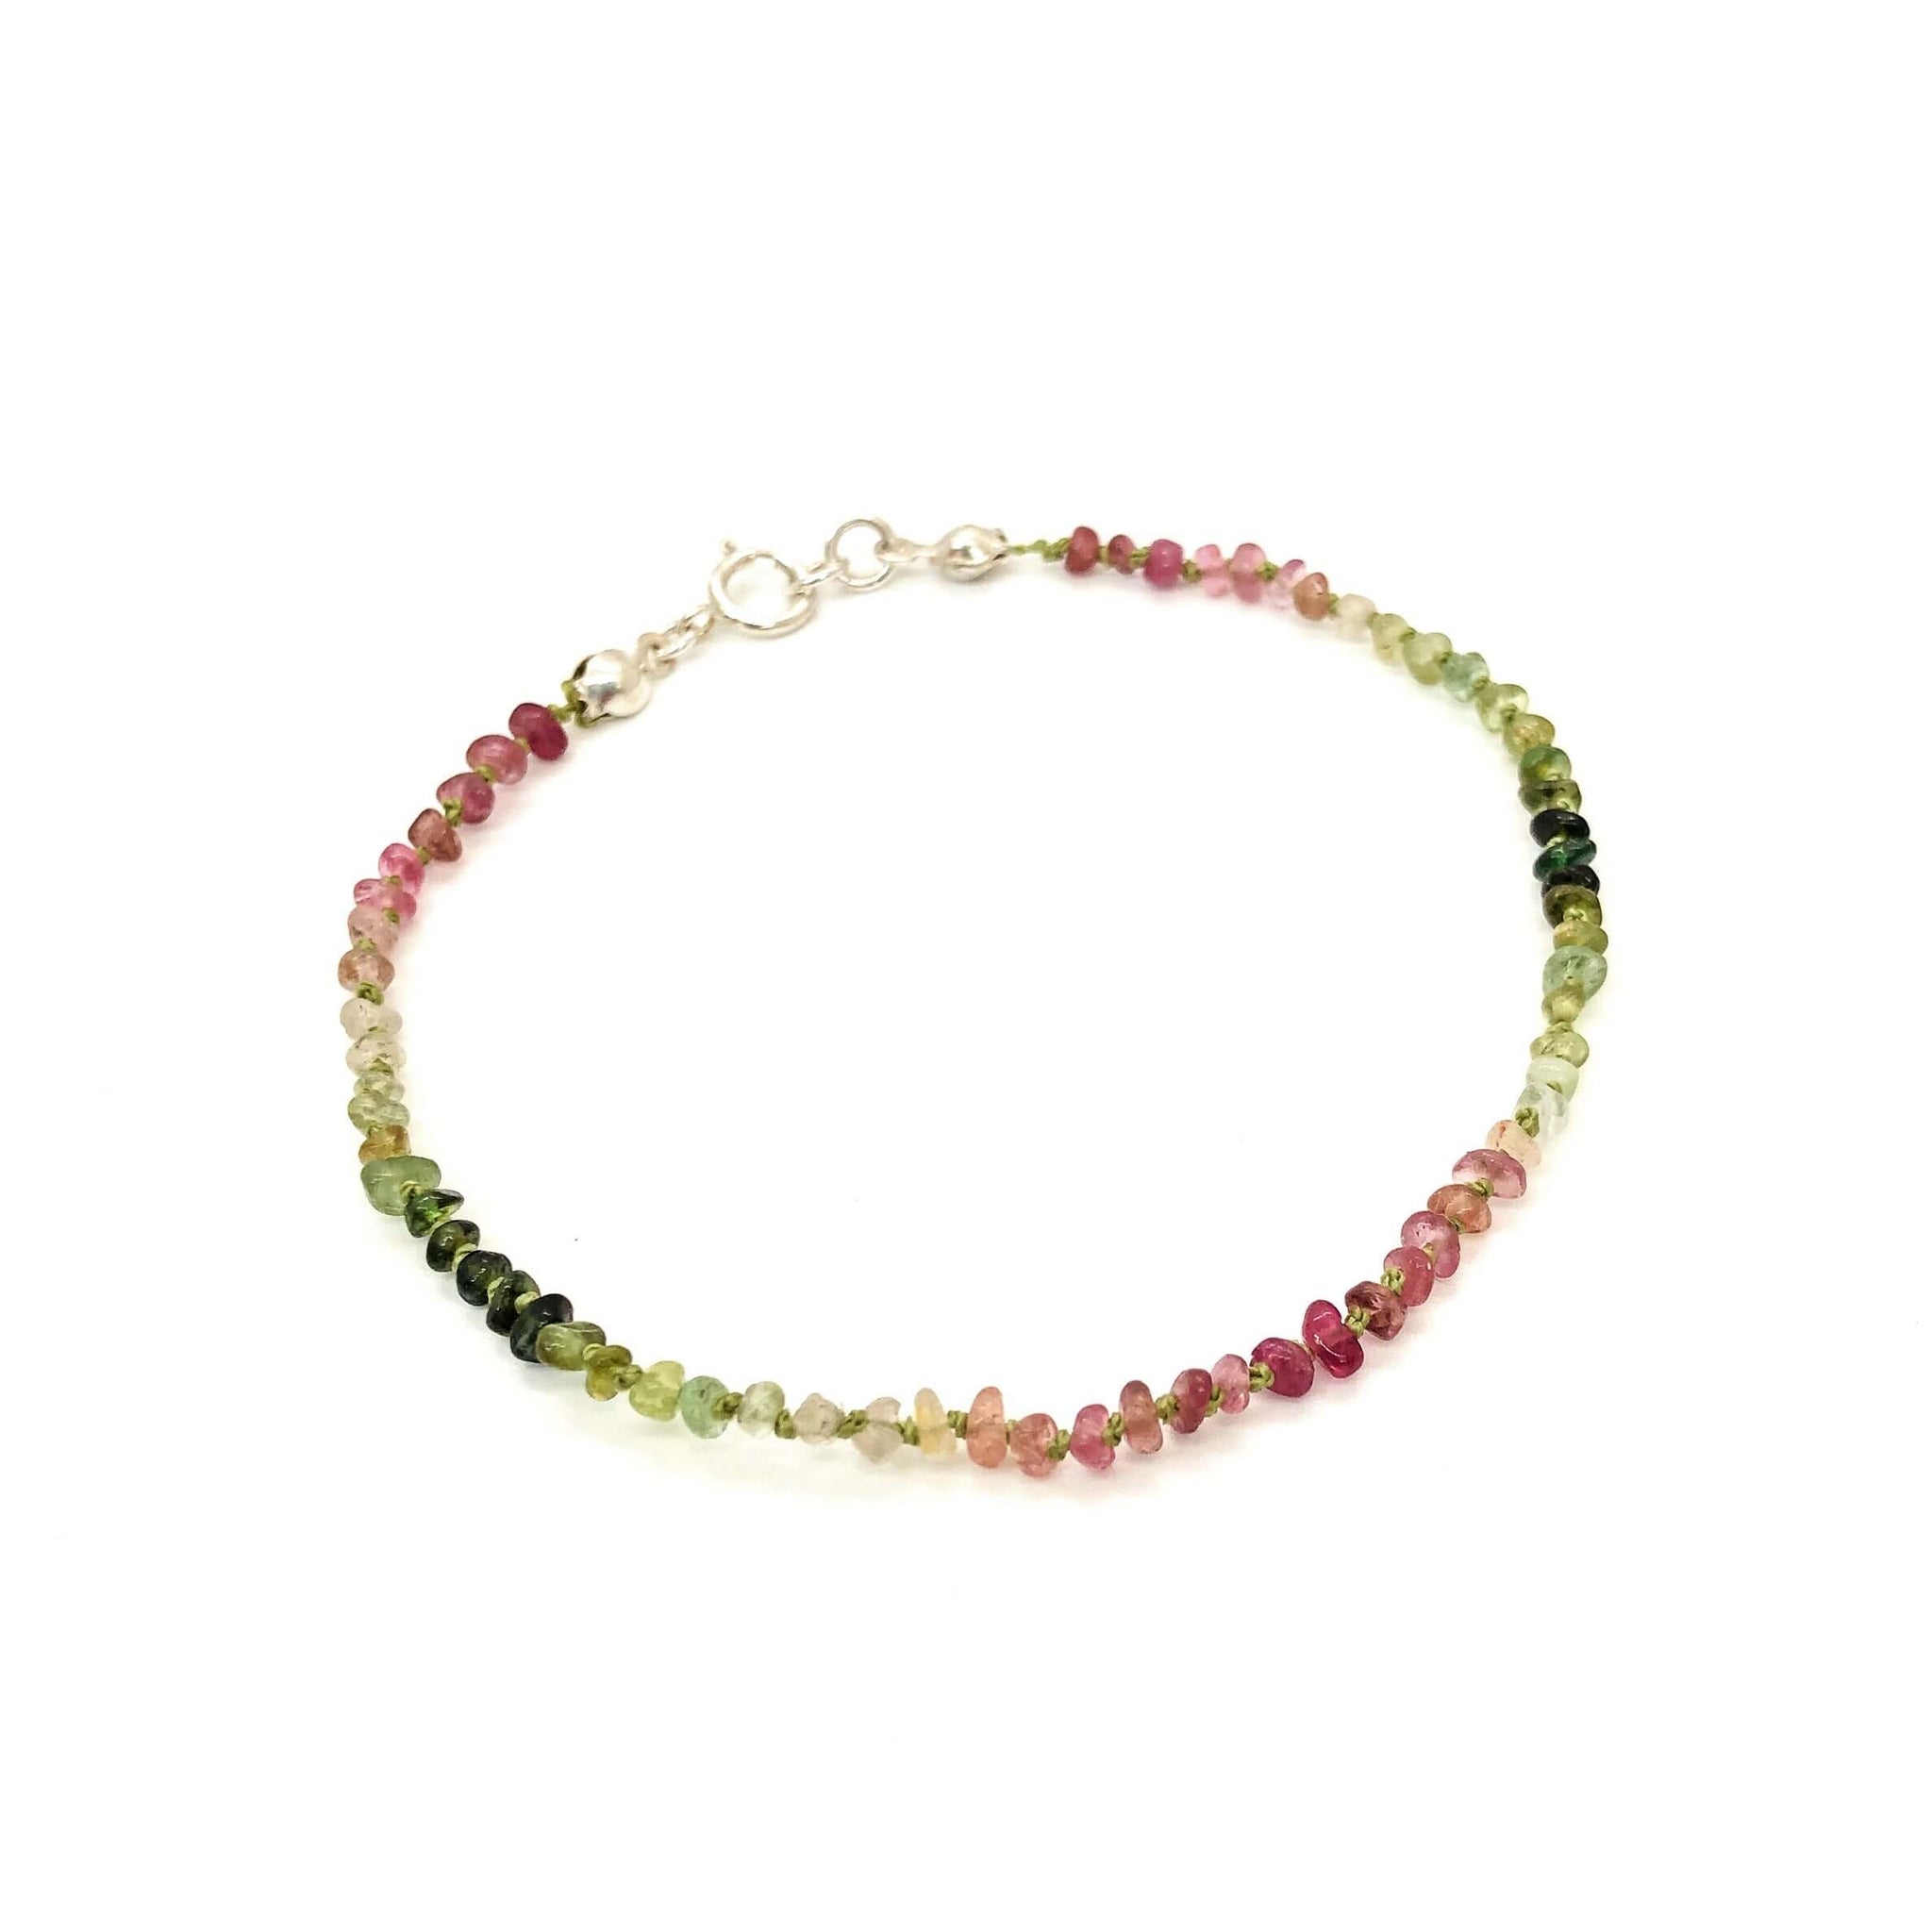 Hand knotted pink and green ombre tourmaline nugget bracelet shown on white background